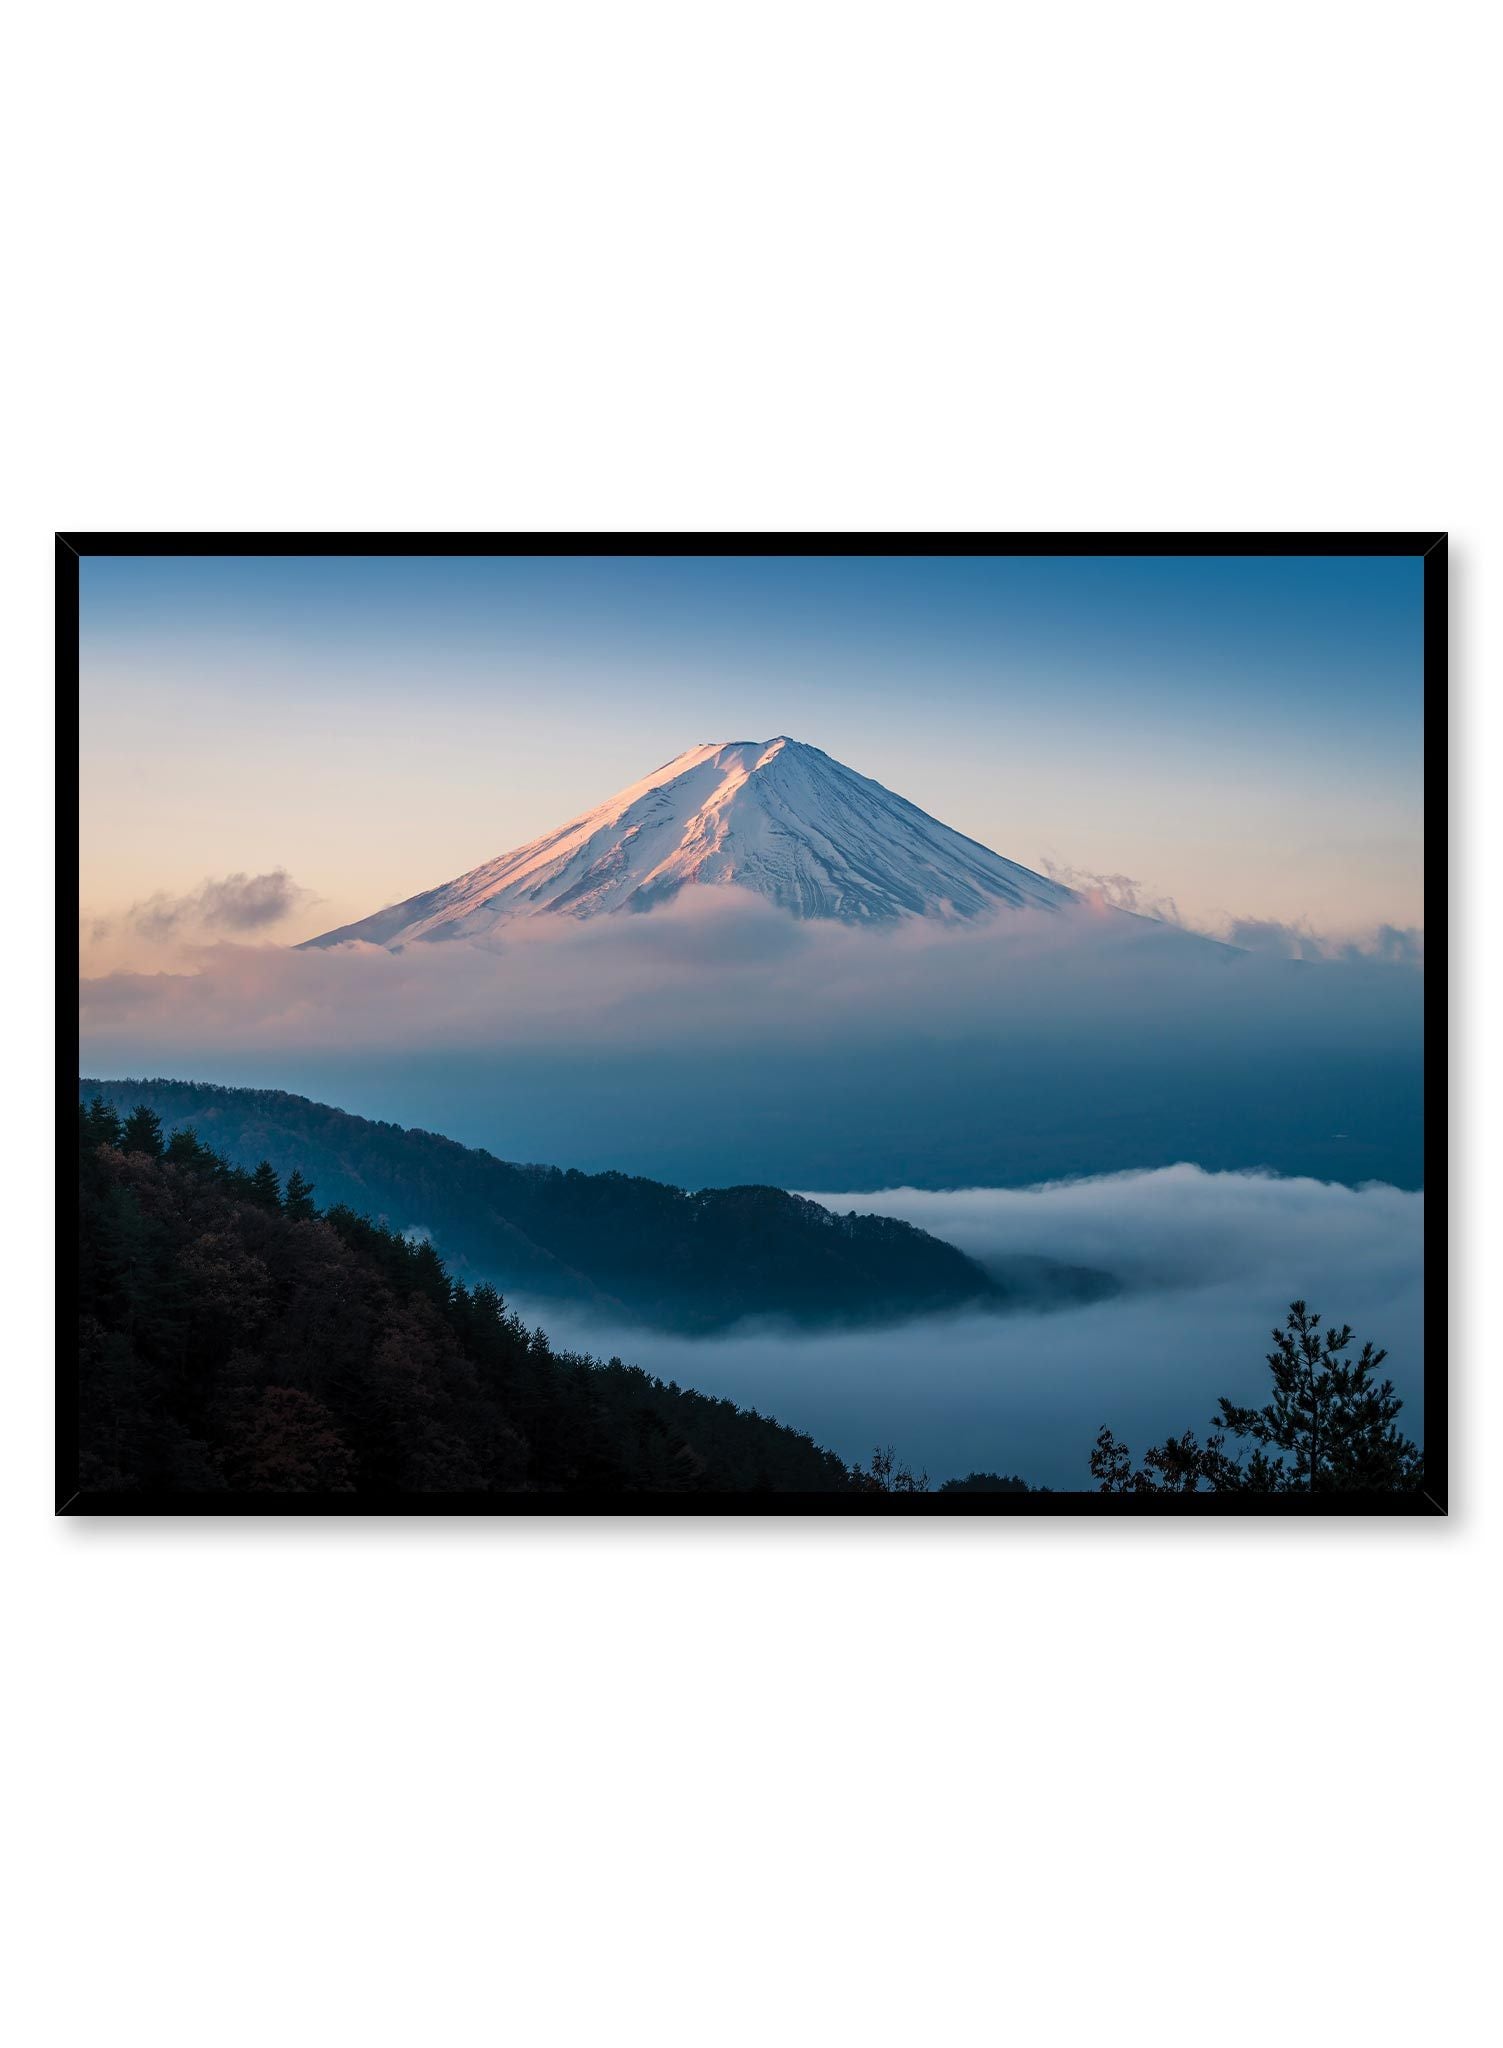 Japanese Summit is a minimalist photography by Opposite Wall of a breathtaking and ethereal view of Mount Fuji.